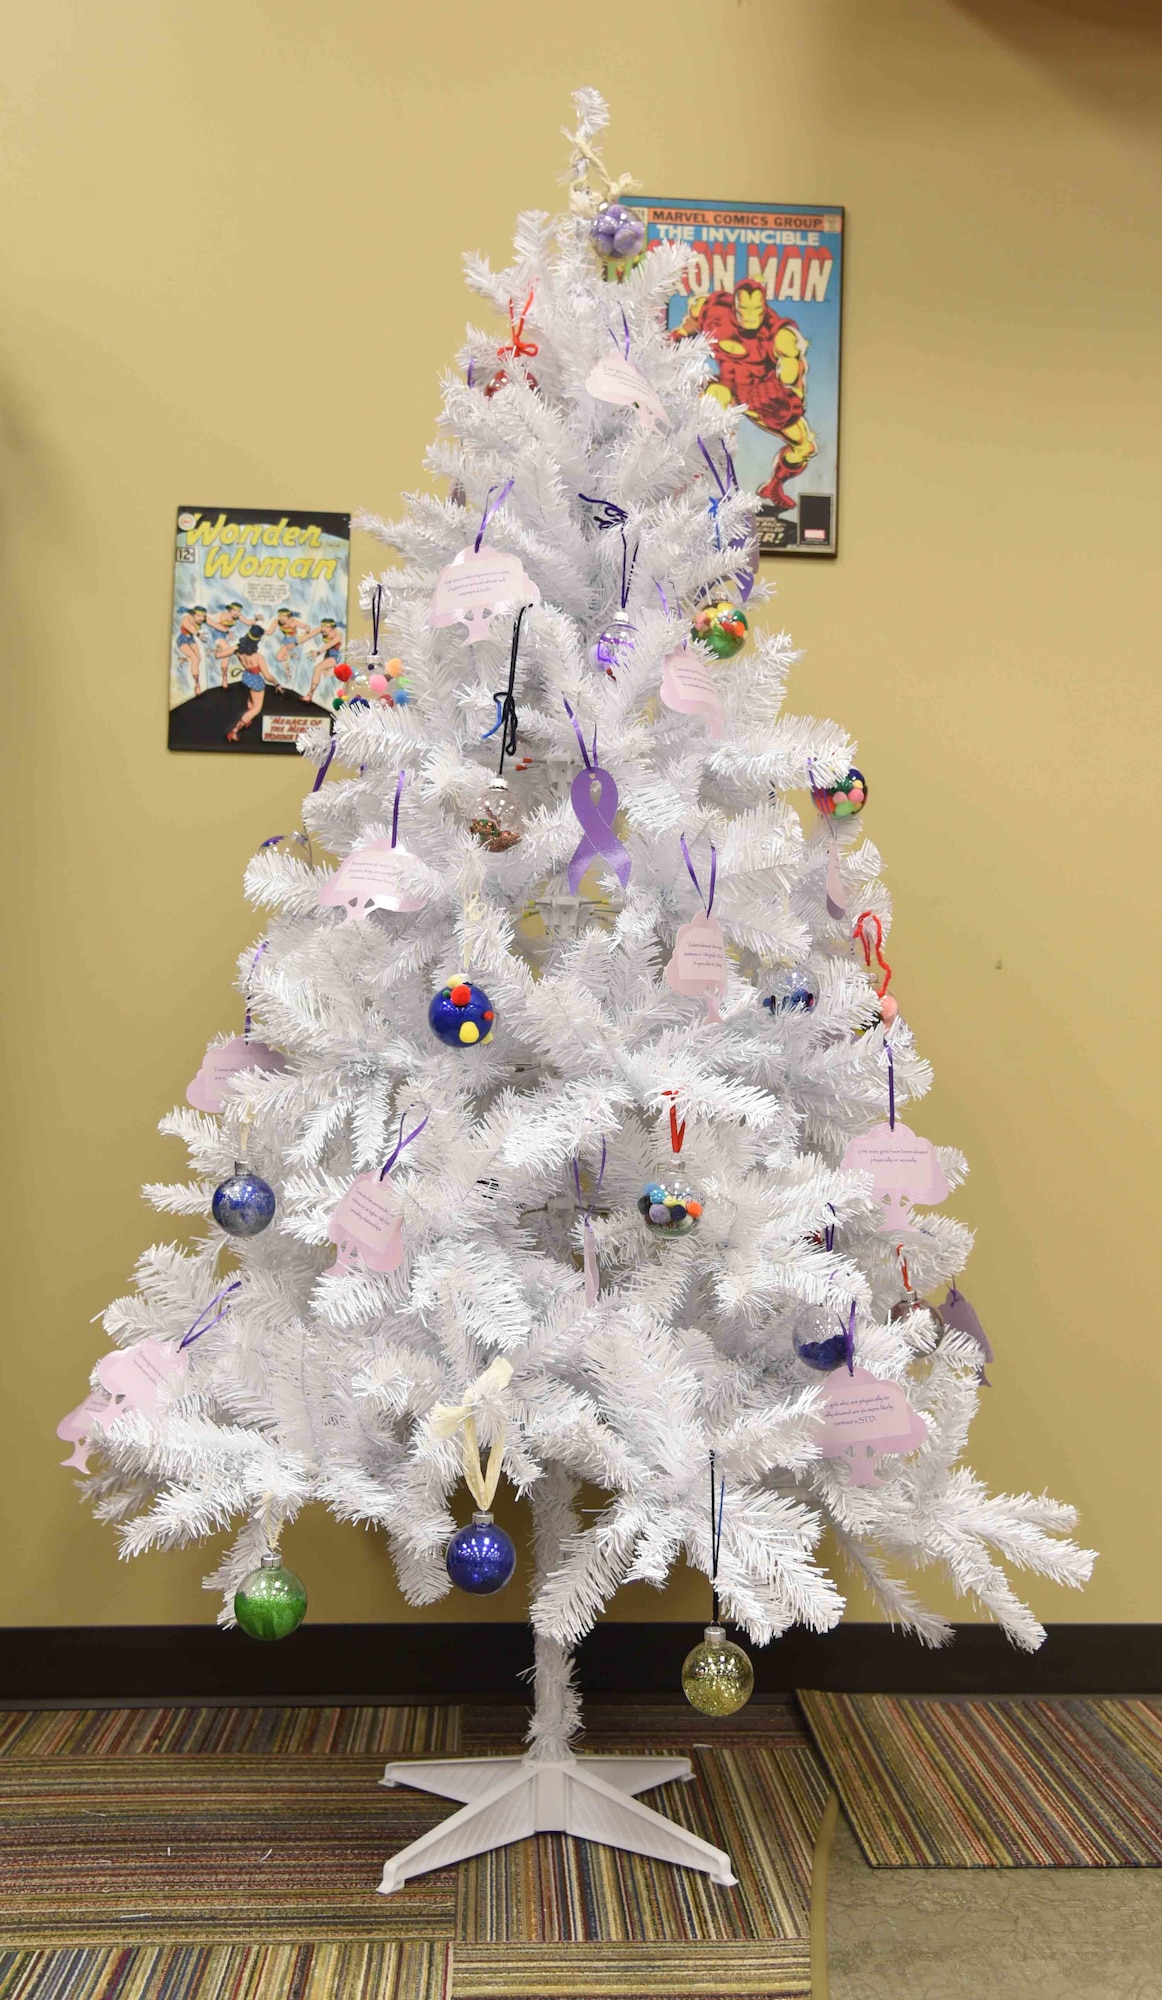 A remembrance tree with 25 ornaments displaying facts about Teen Dating Violence Awareness Month is located in McConnell’s Youth Center during the month of February. The tree helps educate teenagers and parents on the risk of teen dating violence. (U.S. Air Force photo/Airman 1st Class Erin McClellan)